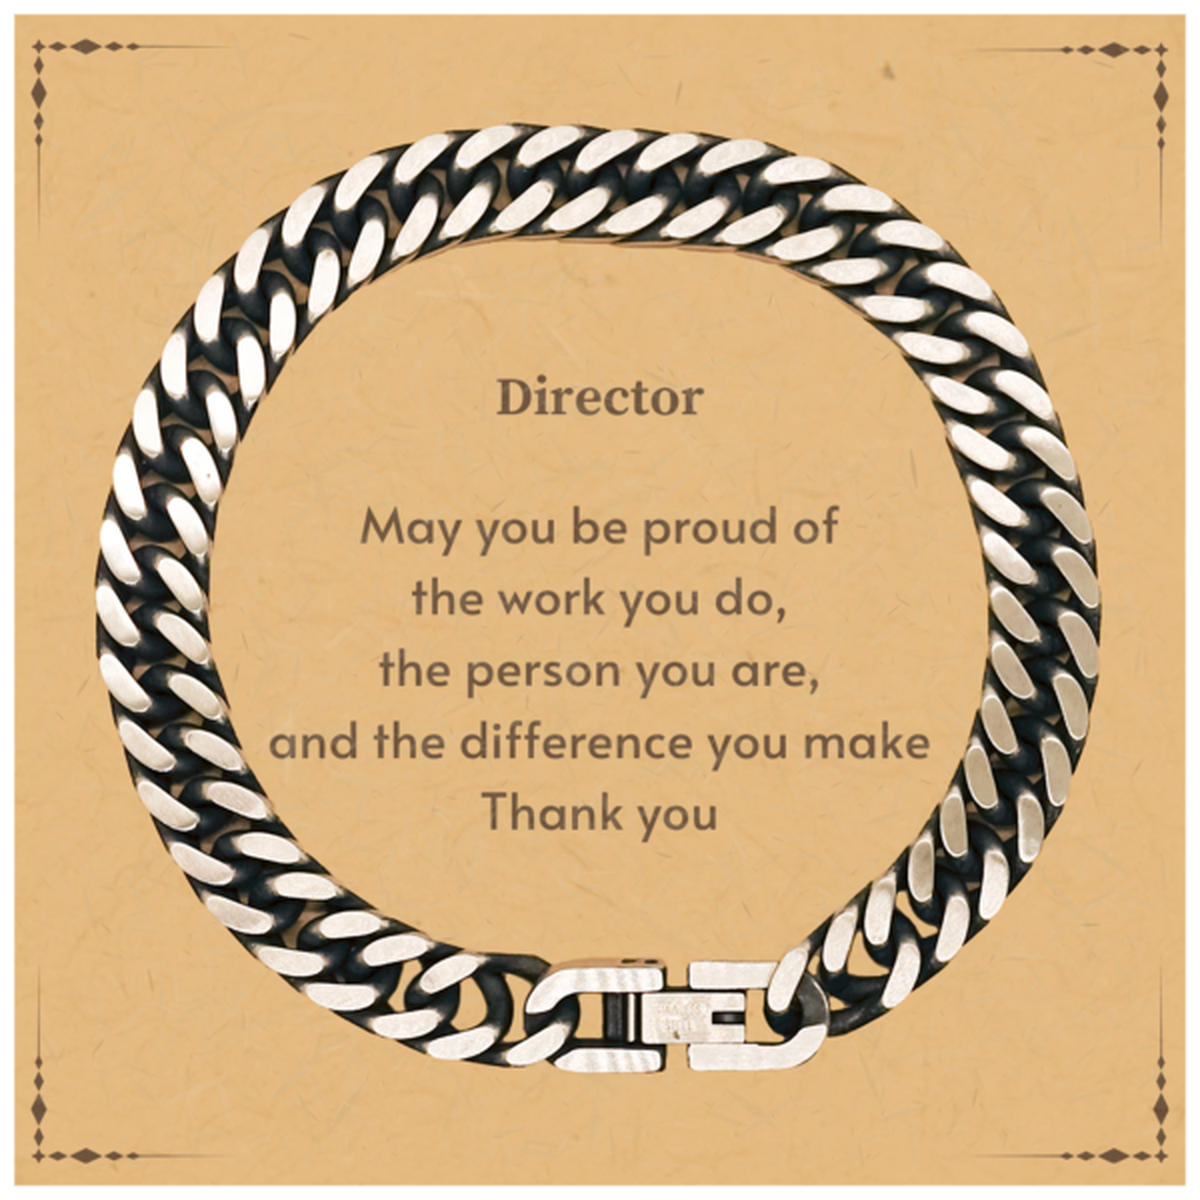 Heartwarming Cuban Link Chain Bracelet Retirement Coworkers Gifts for Director, Director May You be proud of the work you do, the person you are Gifts for Boss Men Women Friends